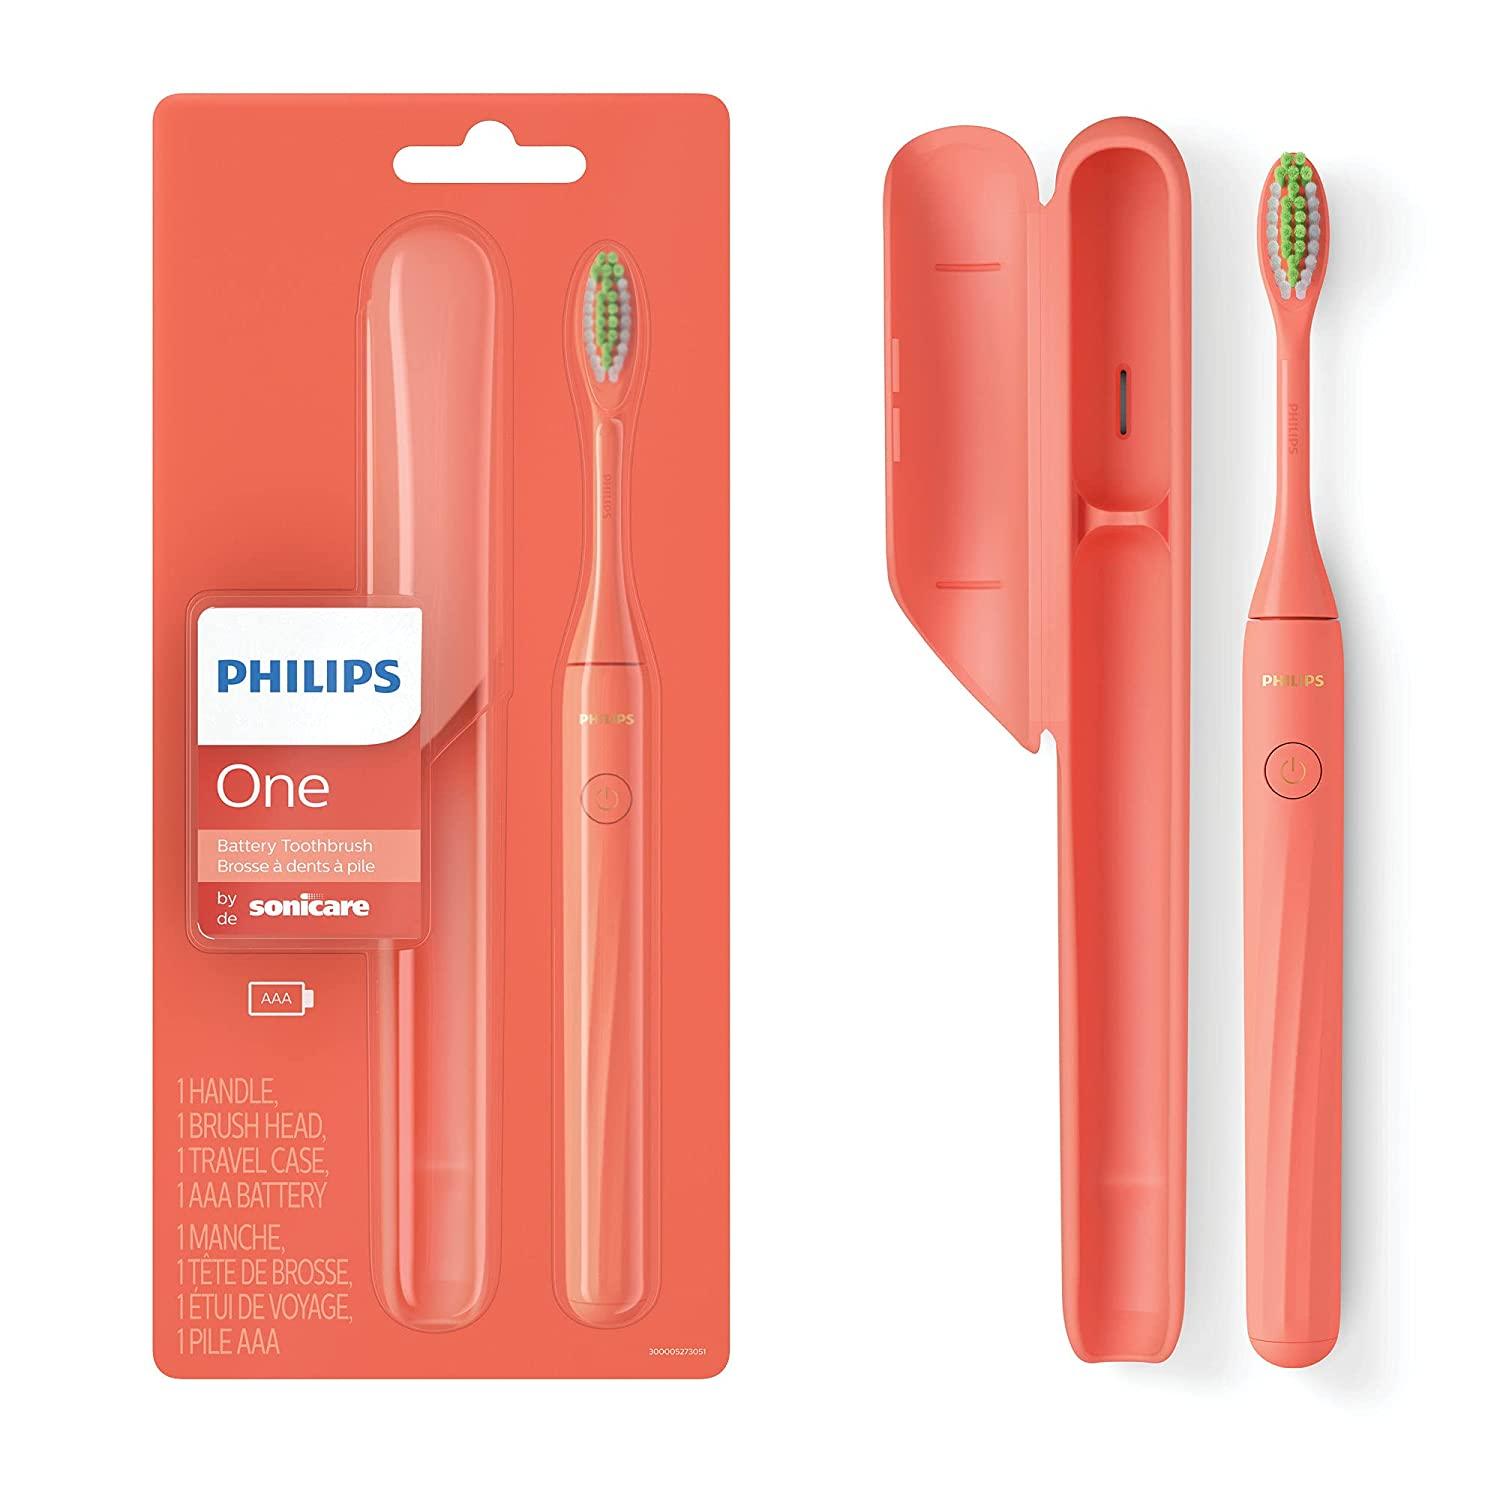 Philips One by Sonicare Battery Powered Toothbrush for $12.49